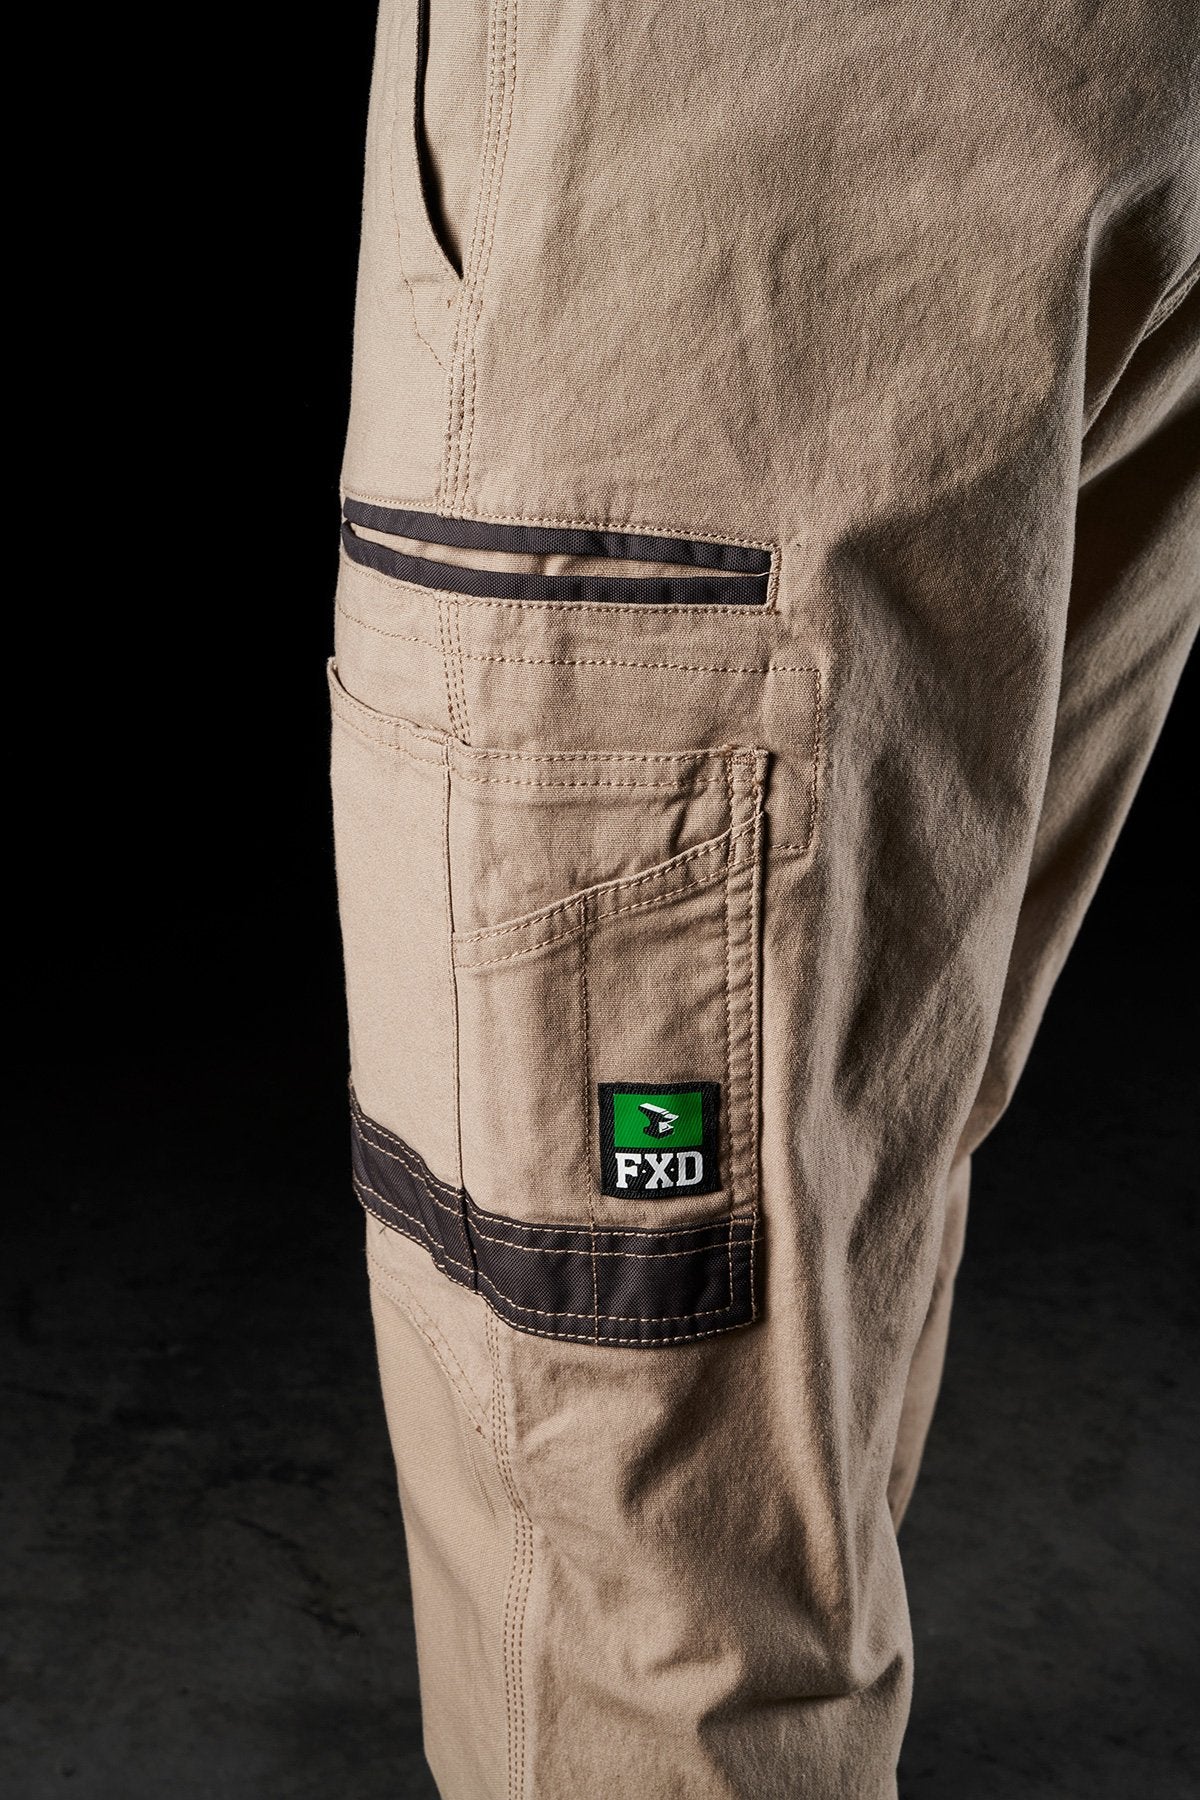 FXD Workwear WP-4T Reflective Cuffed Work Pants  National Workwear —  National Workwear Australia